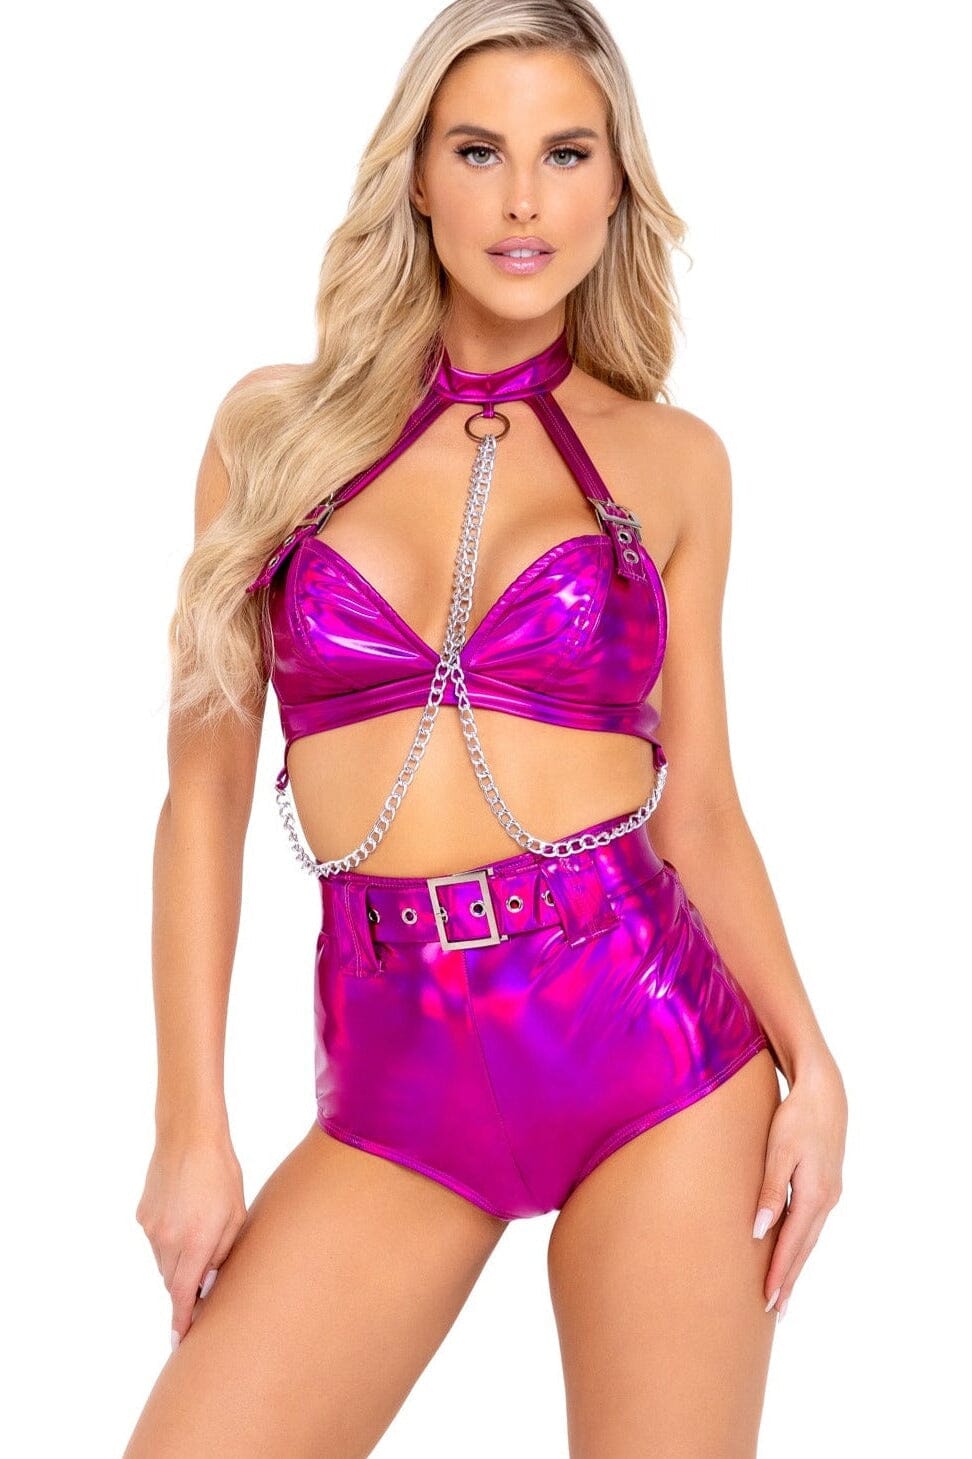 Pink Holographic Top with Chain Detail-Halter Tops-Roma Dancewear-Fuchsia-L-SEXYSHOES.COM